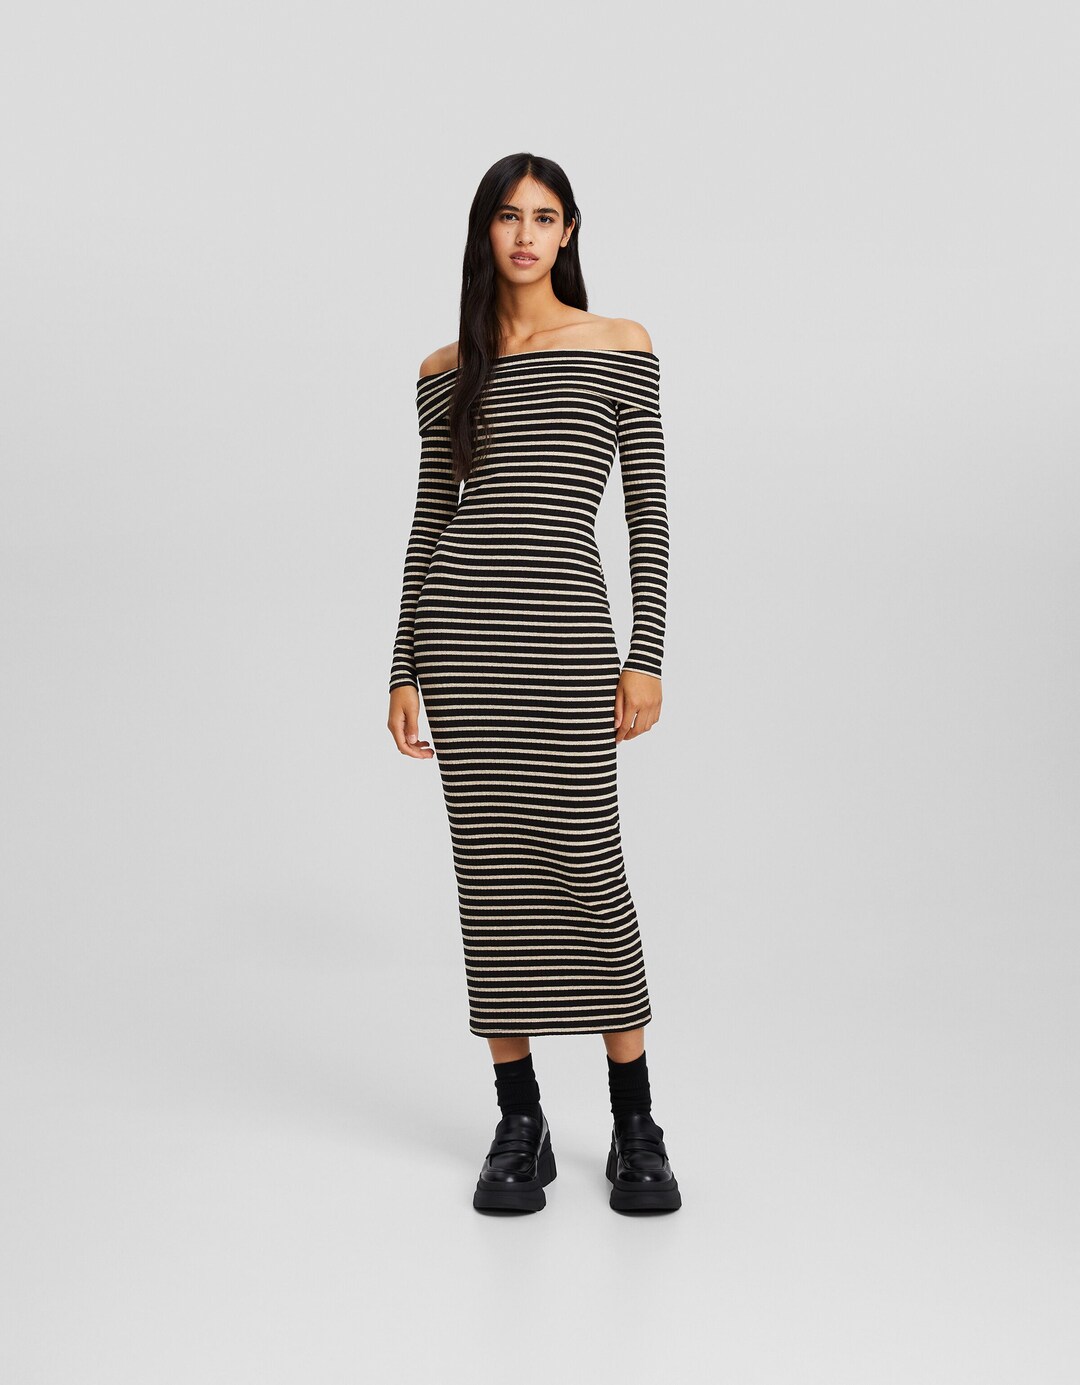 Long knit off-the-shoulder dress with long sleeves